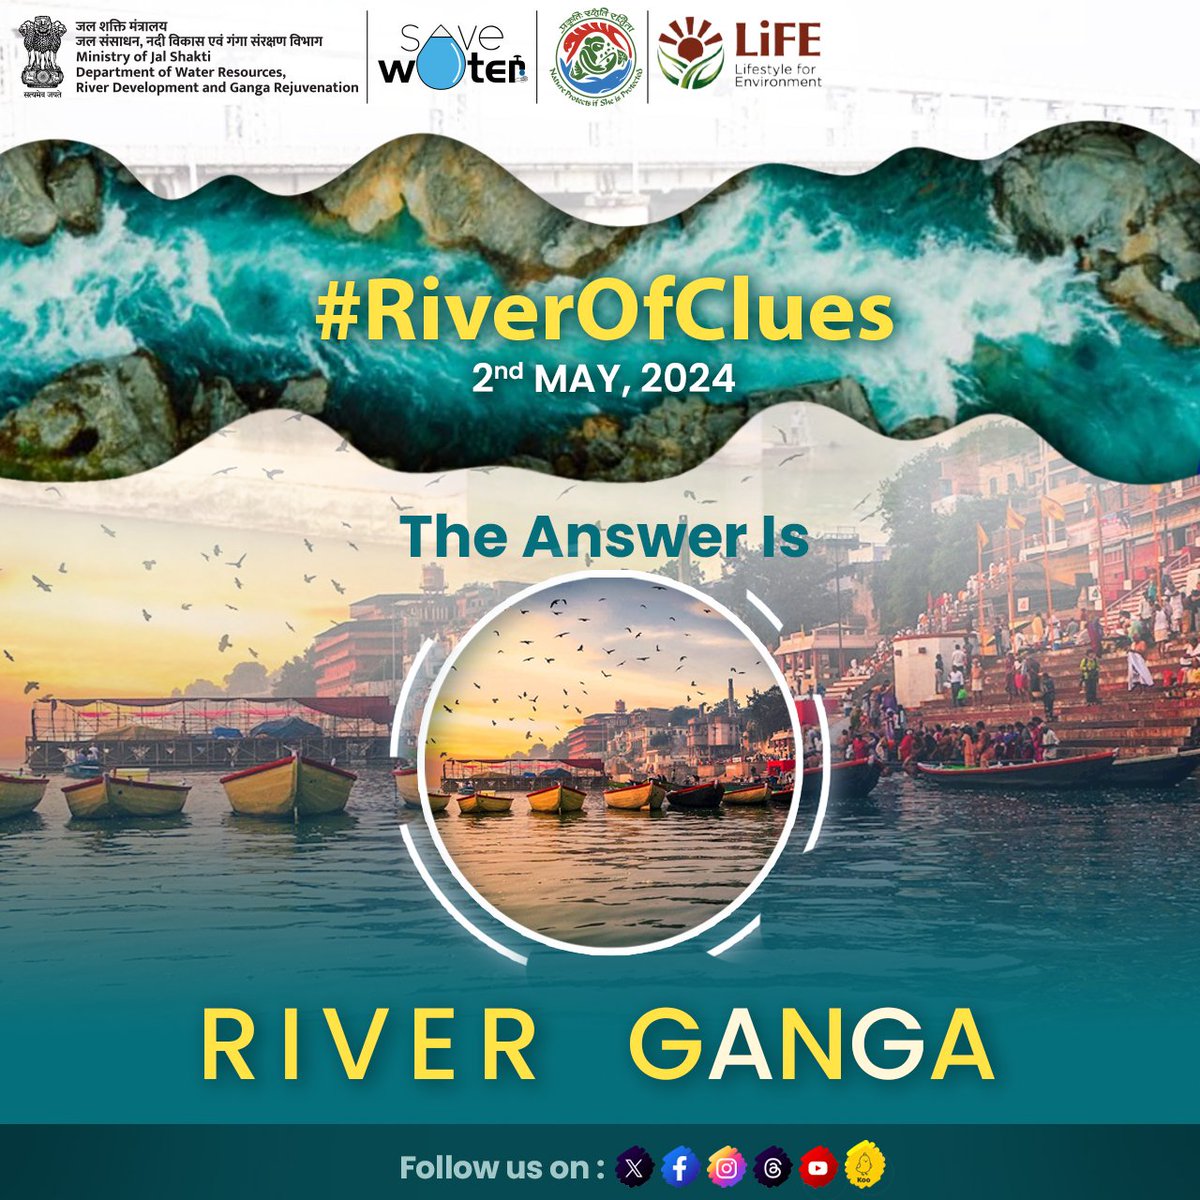 Congratulations to all the brilliant minds who cracked the #riverofclues challenge! Let's keep the excitement alive and invite your friends to join this thrilling adventure. Mention them here, let's hunt clues together & explore intriguing world of @DoWRRDGR_MoJS! #Ganga #DOWR